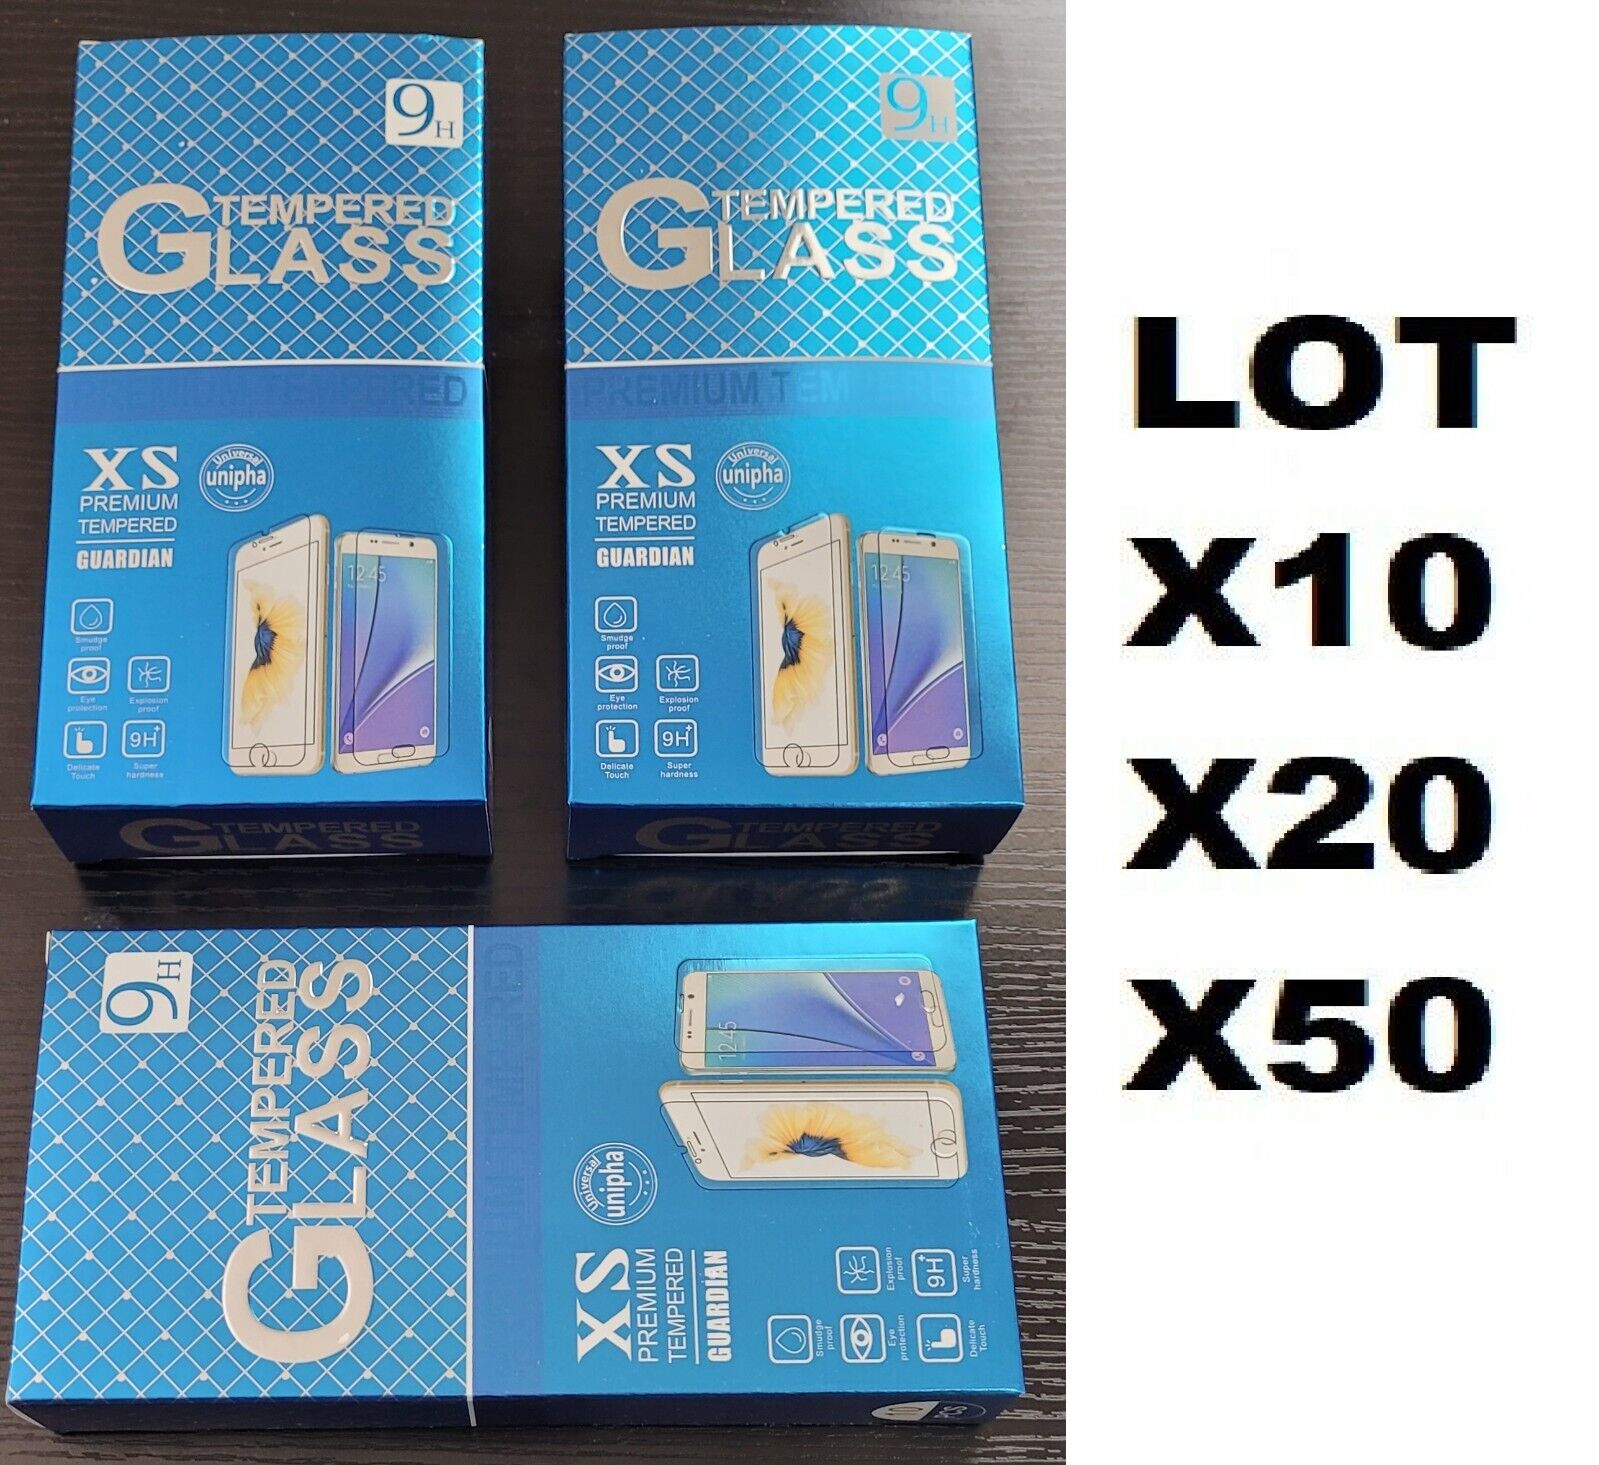 Lot of 10 20 50 Tempered GLASS for iPhone/LG/Samsung/Motorola/OnePlus/Google